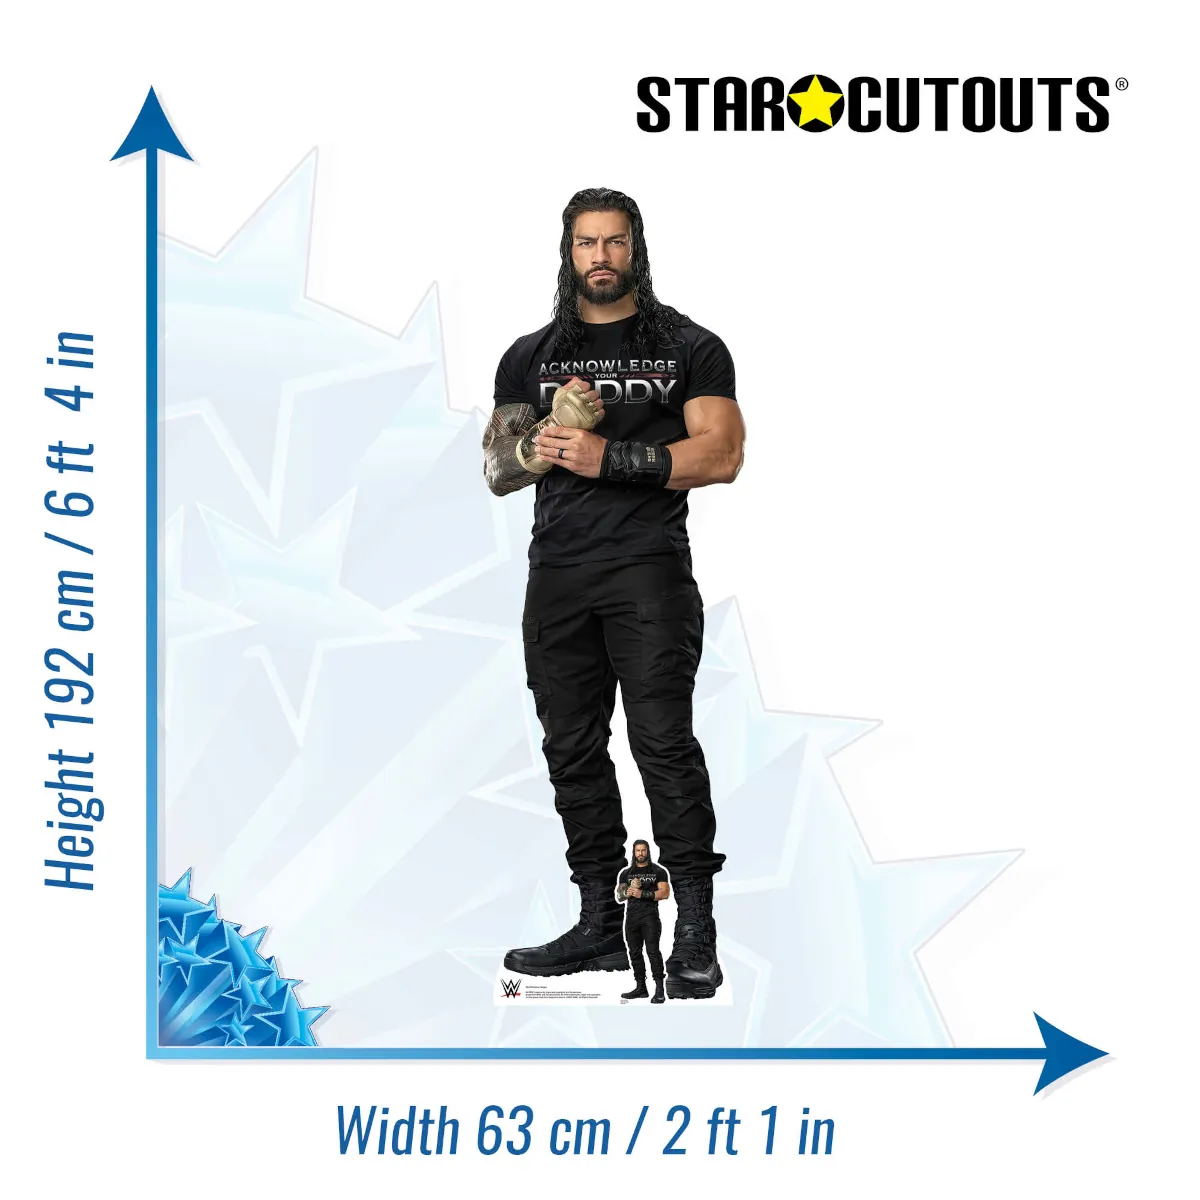 SC4159 Roman Reigns 'Black Outfit' (WWE) Official Lifesize + Mini Cardboard Cutout Standee Size